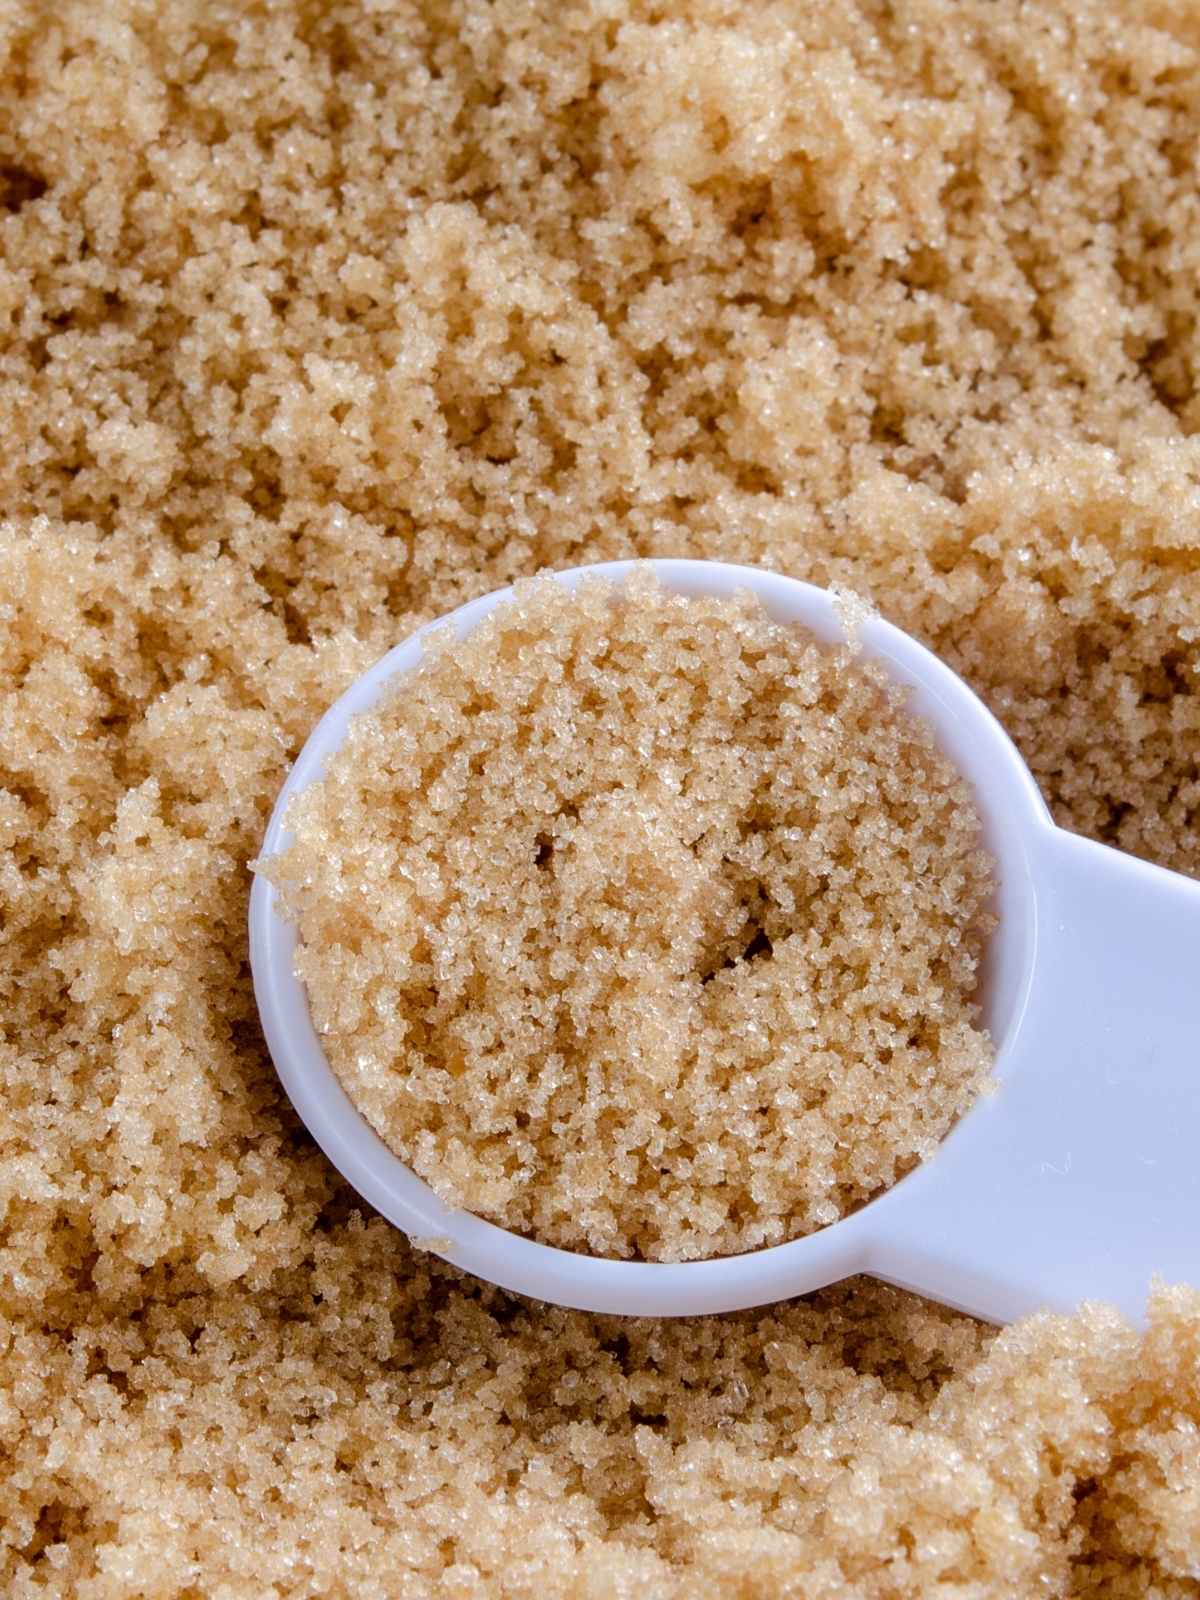 Light brown sugar with a measuring spoon.